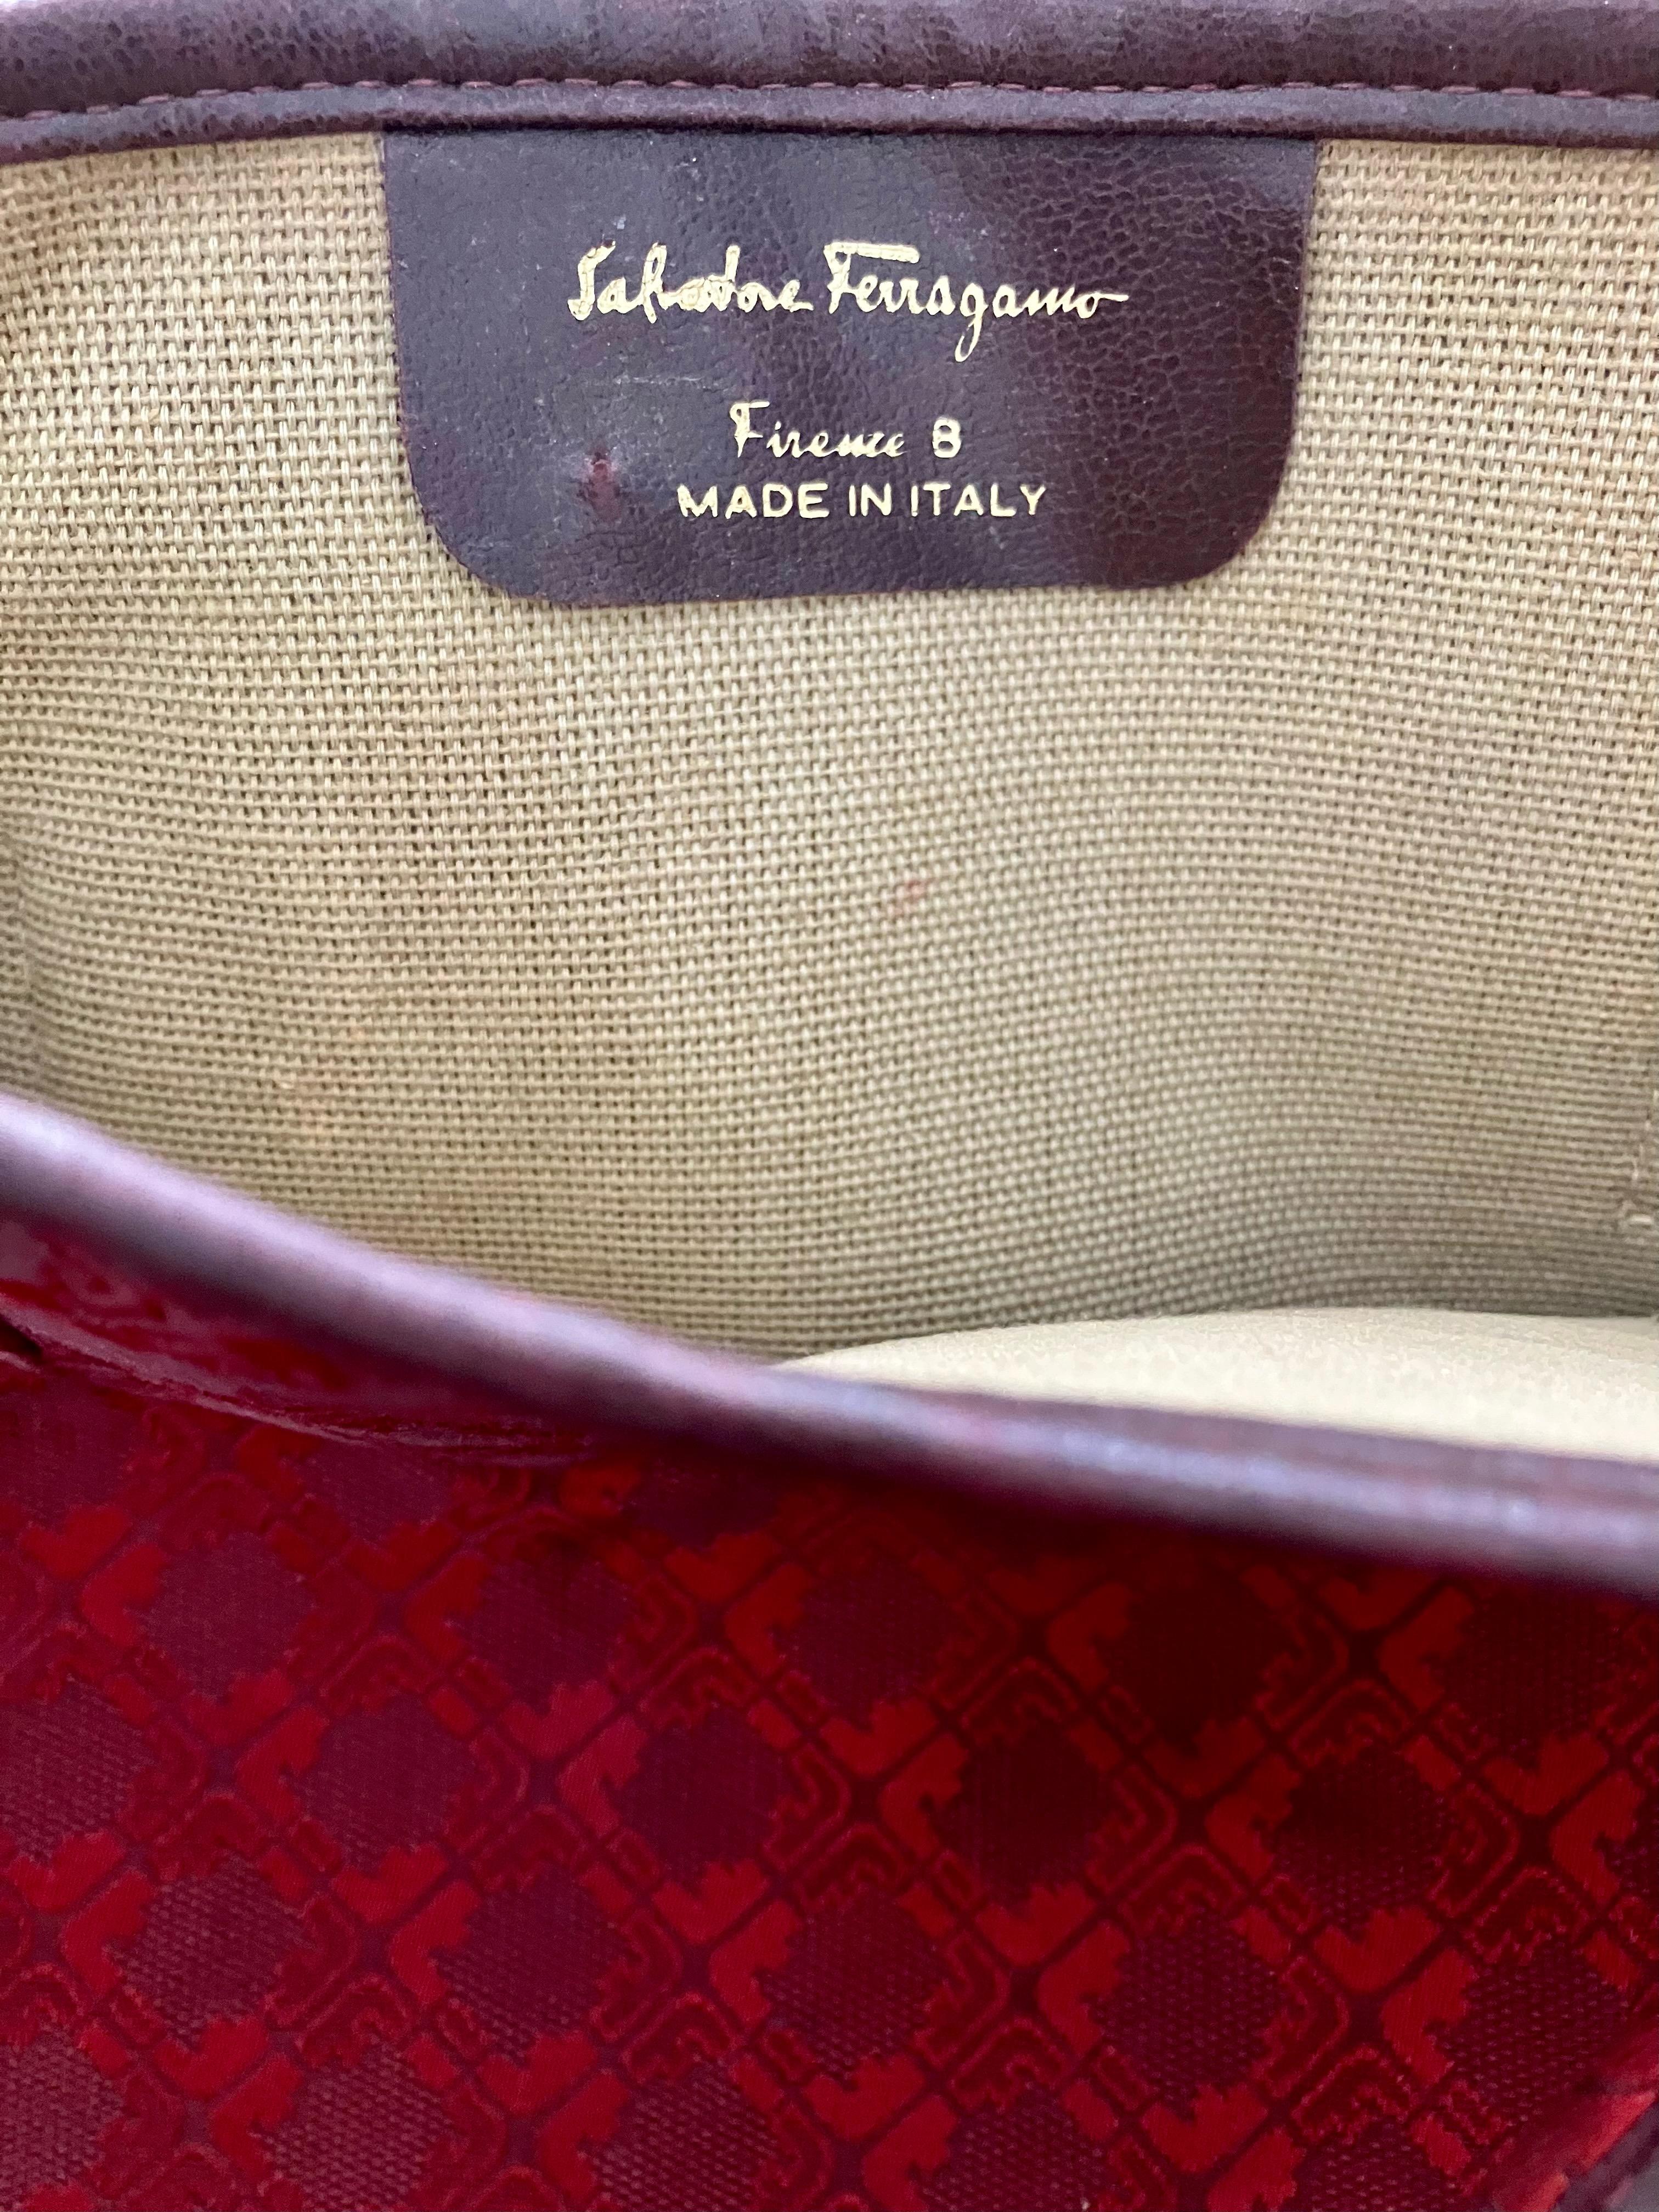 1970s Ferragamo burgundy tote bag featuring an all-over canvas pattern, burgundy leather finishing, top handles, inside camel cotton canvas, inside logo leather brand  stamp label.  
Circa 1970s
Made in Italy (Firenze 8)
In good vintage